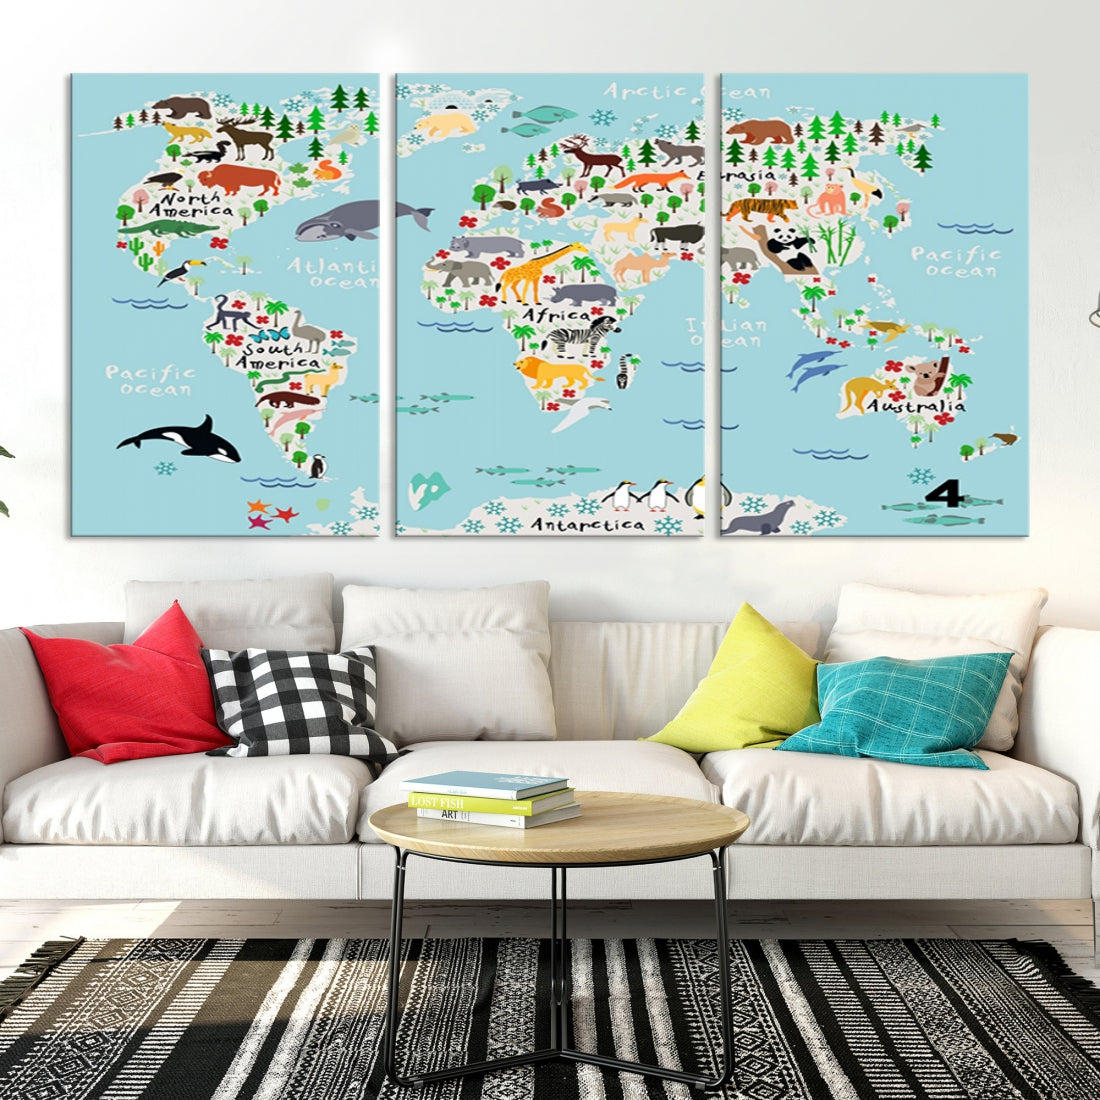 Animal Illustration World Map Canvas Print Framed Large Wall Art for School or Classroom